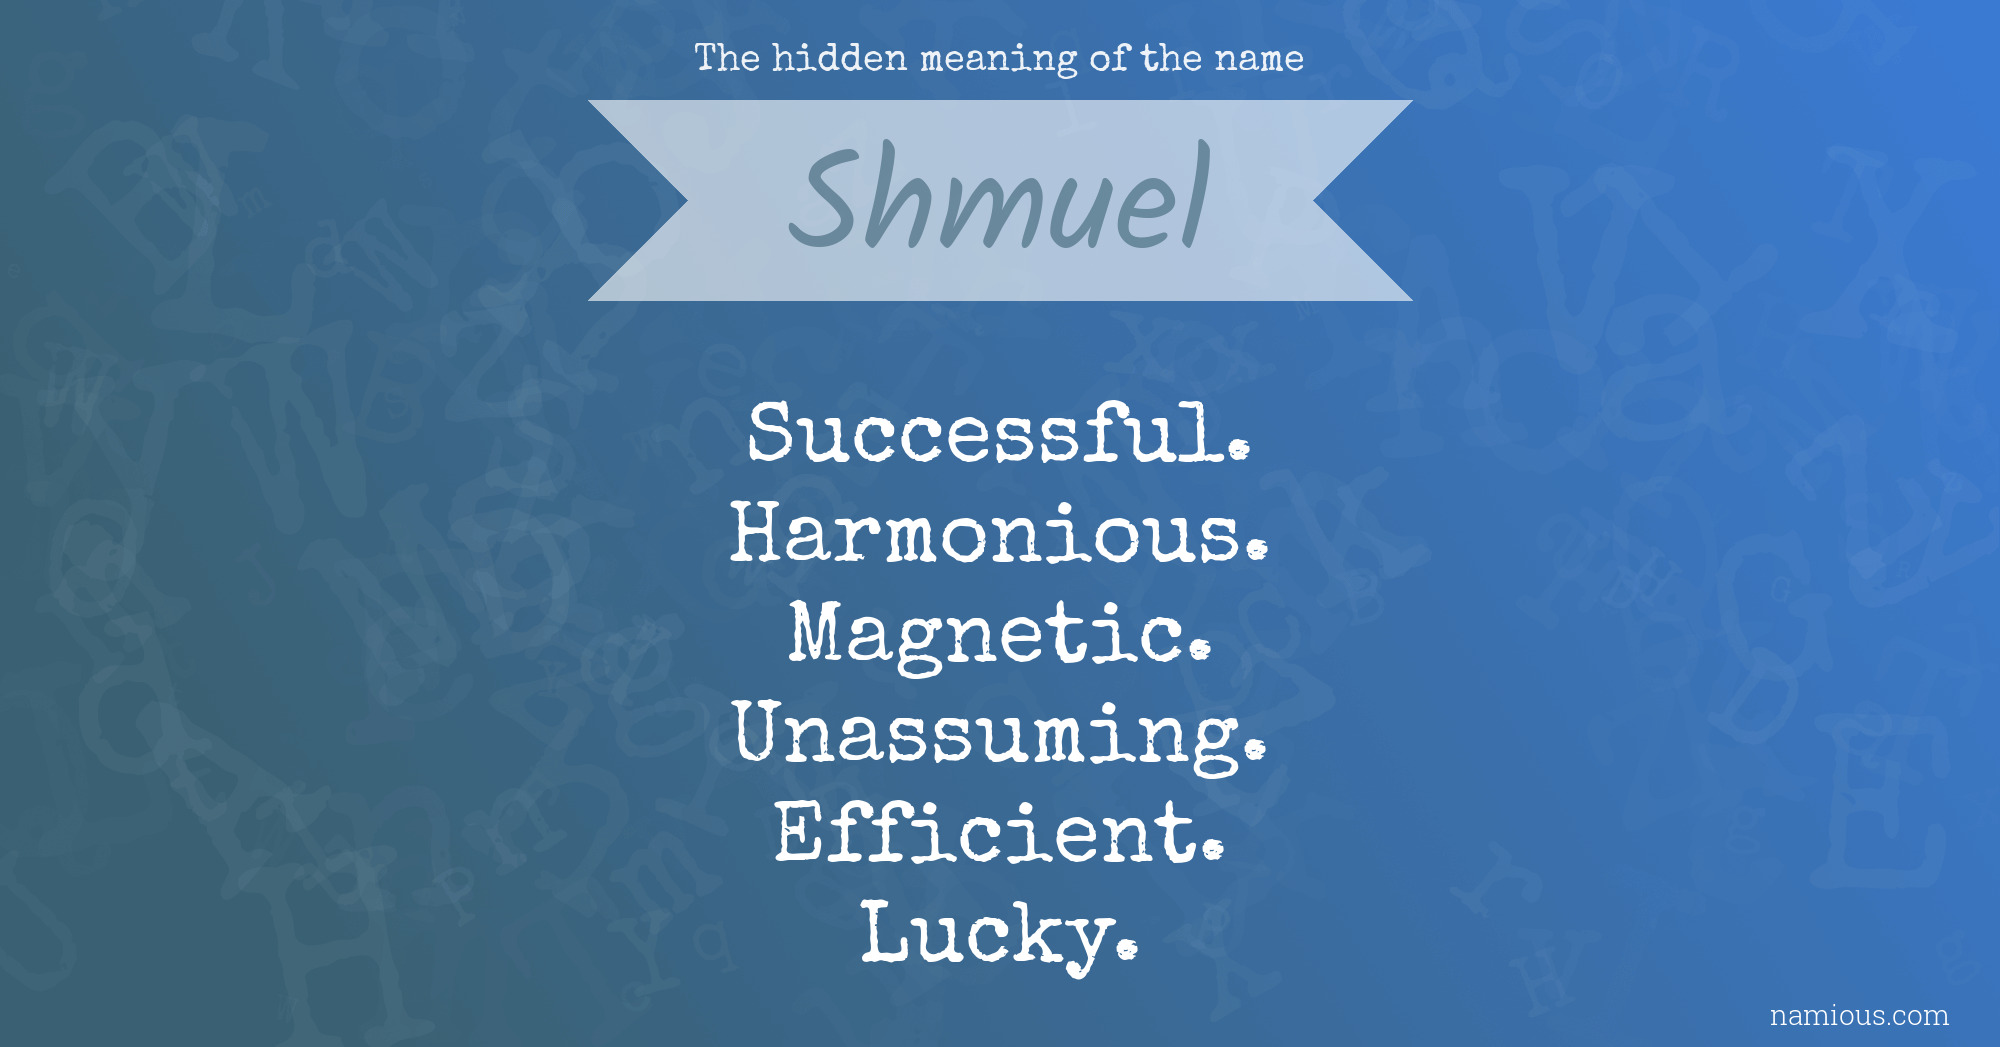 The hidden meaning of the name Shmuel